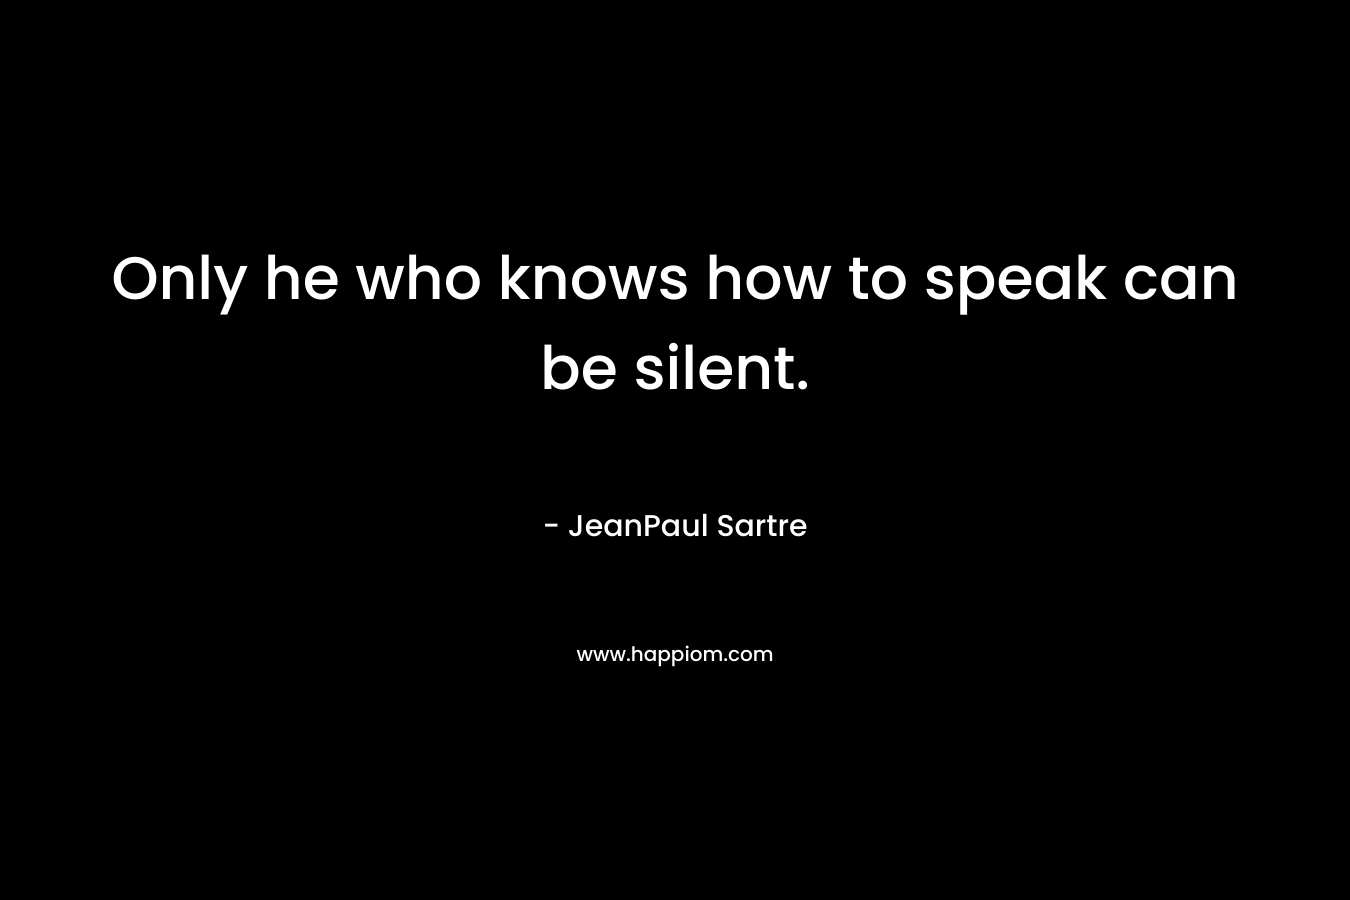 Only he who knows how to speak can be silent. – JeanPaul Sartre